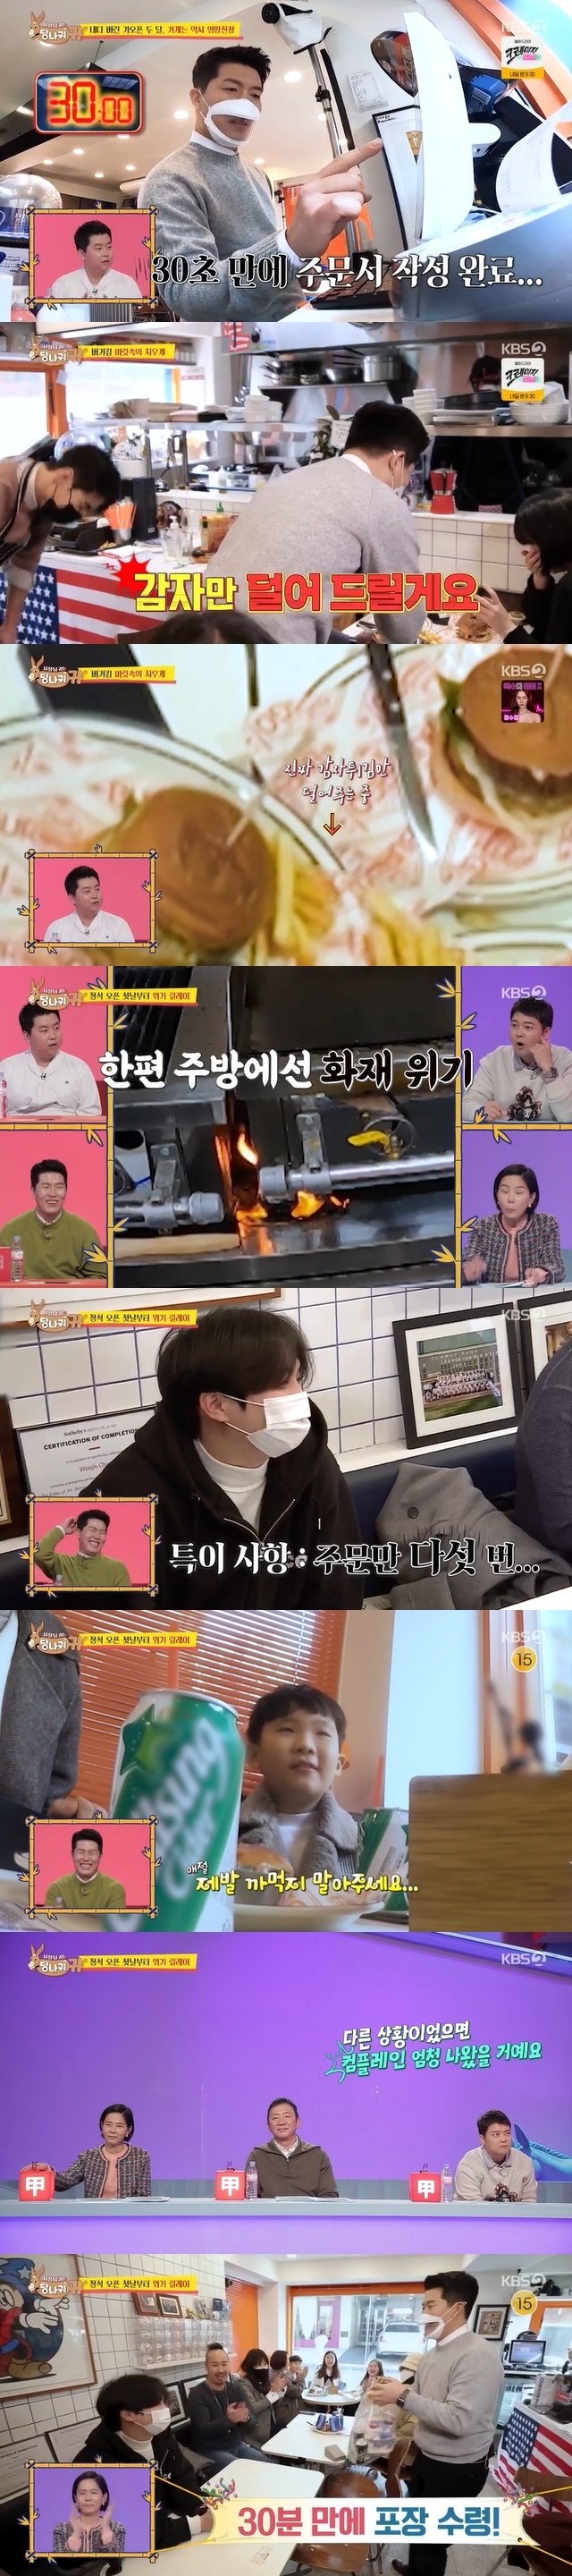 Complacent mistakes that could not have been made if it was a general store became an entertainment in Kim Byung-hyuns store.In the 148th KBS 2TV entertainment Boss in the Mirror (hereinafter referred to as The Ass ear) broadcast on March 20, the official opening day of Kim Byung-hyuns burger house Cheongdam branch was drawn.On this day, Cheongdam branch met the official opening day that waited and waited, but problems occurred from the beginning.One of the halls, Jung Woo-jin and The Kitchens youngest, Yoo Yeon-sik, were not able to go to work because he was not feeling well.Chief Chef Lee Jae-young and Sue Chef Jeon Eun-hye recommended that the official opening be delayed, but Kim Byung-hyun pushed the official opening and even set the Haru sales target at 3 million One.Kim Byung-hyun confidently challenged the hole serving but was disastrous to see it released on VCR afterwards.Kim Byung-hyun asked several times because customers could not easily memorize it when they ordered it, and they did not set the tableware properly, so the customer made it look again.It also took a very long time to write an order once because I could not use the force properly.Jun Hyun-moo, who watched, was frustrated and said, What did you do during the opening period for two months?Nevertheless, guests took this Kim Byung-hyun pleasantly.Yeirang Esther Lee, CEO of sports agency who visited the store with Yoo Hee-kwan, ordered the beverage as much as possible when Kim Byung-hyun forgot the order, and a general customer who ordered the set was wrong as a single item, laughed even though Kim Byung-hyun moved the fries from another set that came out as a misconception. There you go.Lee Dae-hyung, who came as a guest like Yoo Hee-kwan and Yeirang Esther Lee, asked Kim Byung-hyun to wash the dishes (?), and was suddenly put into The Kitchen.A real mess was also made: Kim Byung-hyun reconfirmed the order of a packaged customer six times because he did not remember the order.In the meantime, the phone rang for a long time due to the sudden disappearance of the phone in the store, and the fire broke out in The Kitchen.Kim Byung-hyun said, Even in this situation, I have so many orders that I forget (orders) while Im working for a while, I think I have short-term amnesia.It is not my fault, but suddenly the customers who made a lot of mistakes are bigger. When Kim Byung-hyun checked the order for the sixth time to the packing order customer, the child customer at the other table told the order instead and said, Please do not forget.Jun Hyun-moo, who saw this, said, If it was a different situation, the complain would have been enormous.Eventually, the packaging order customer received the food in 30 minutes, and the customers of the store applauded the packaging order customer who endured the long time.On this day, store sales were half of Kim Byung-hyuns target, 1.5 million One.Kim Byung-hyun nevertheless offered his self-comfort, uttering the wrong saying: The beginning is half Mother.